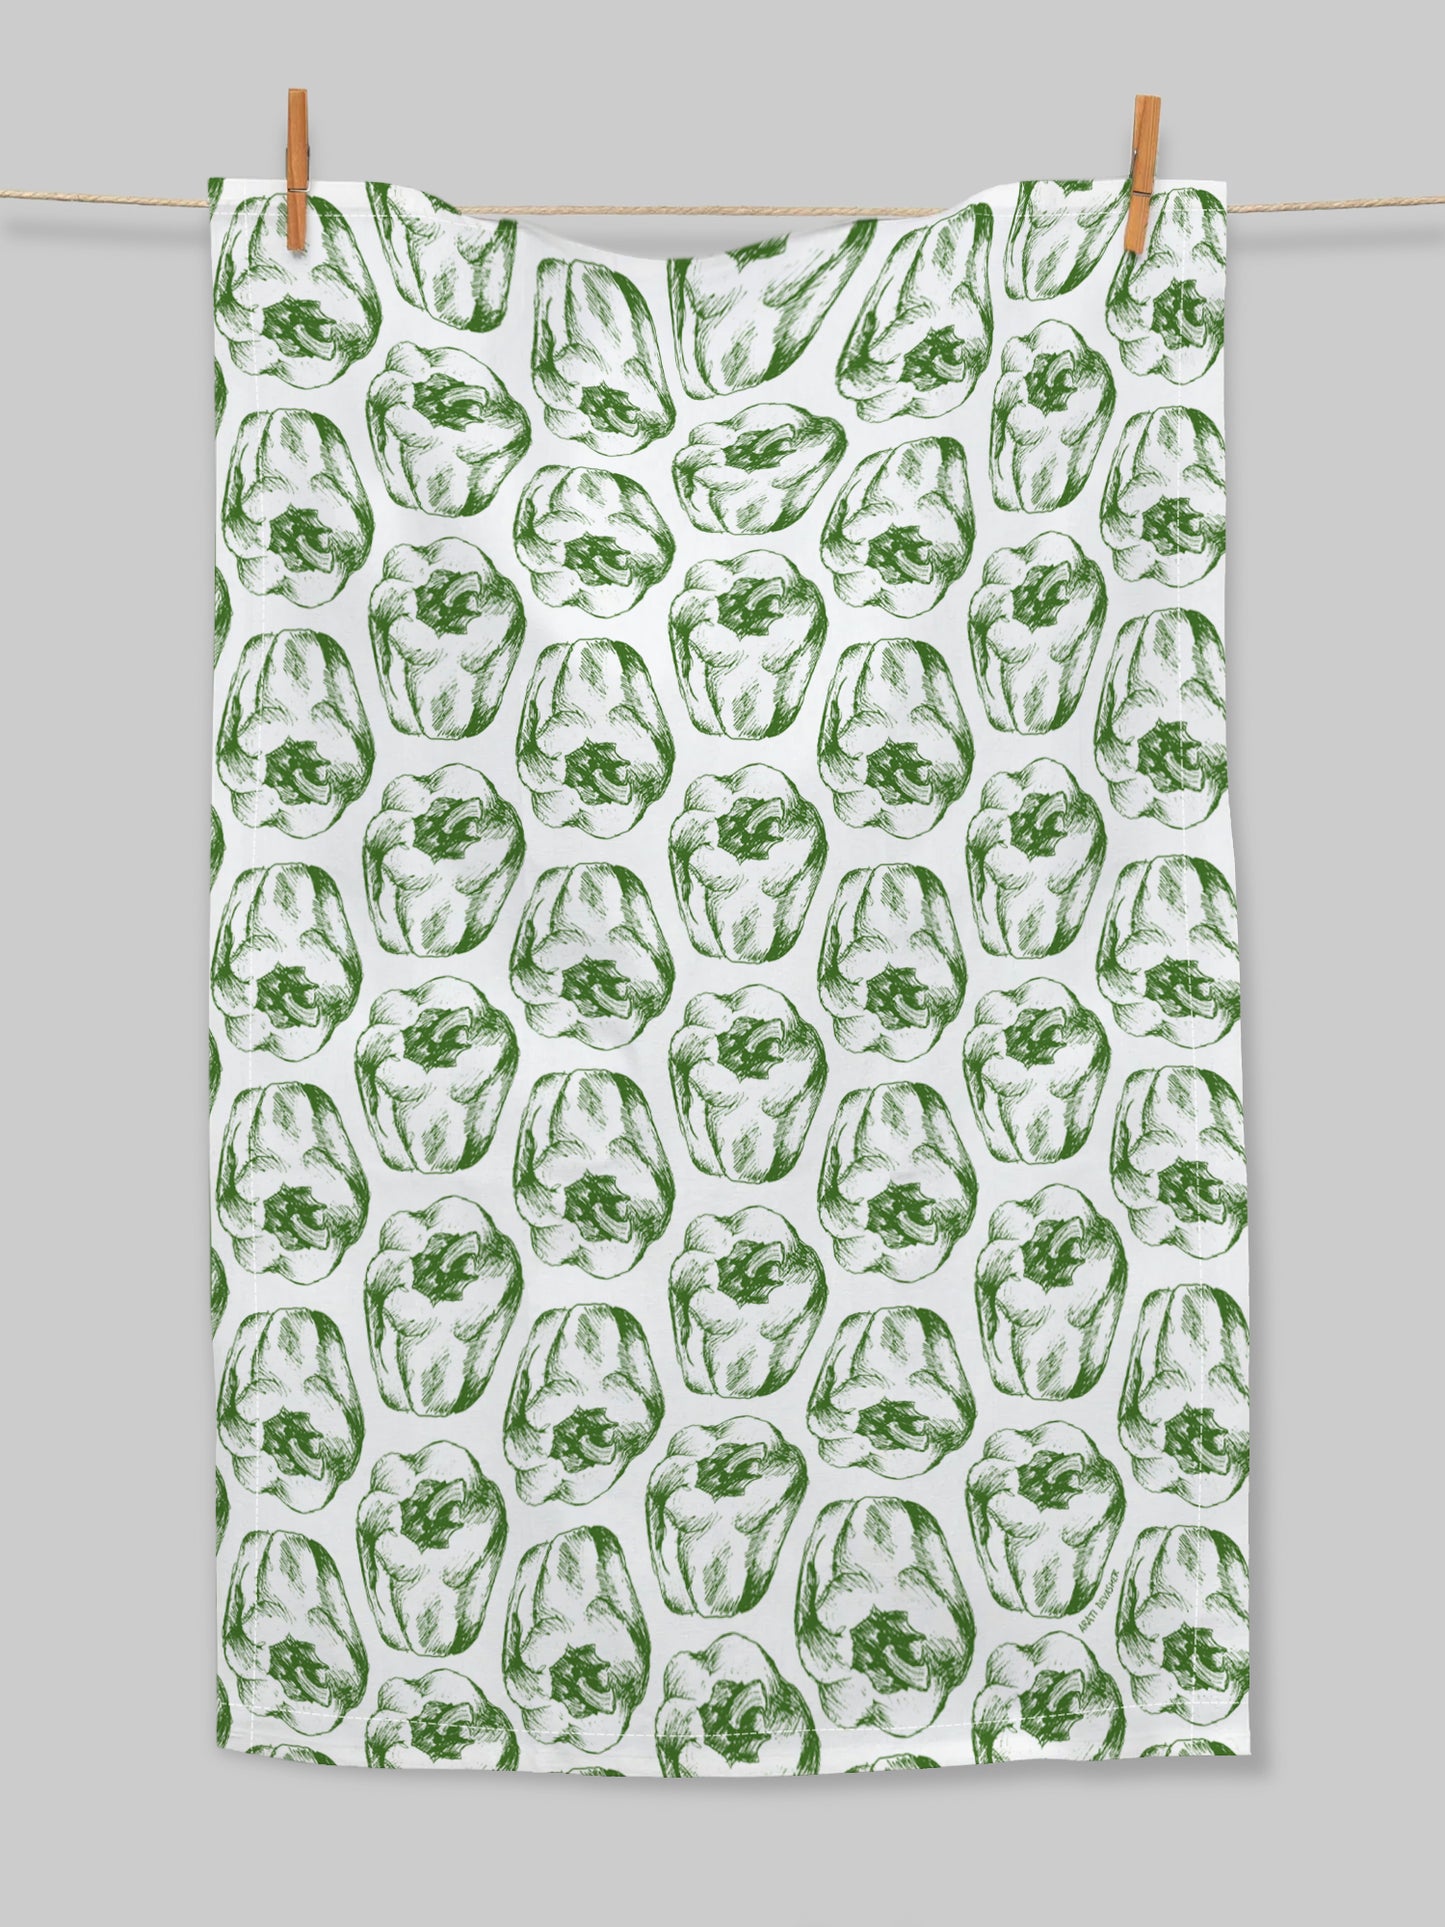 Green Peppers – tea towel or wall hanging